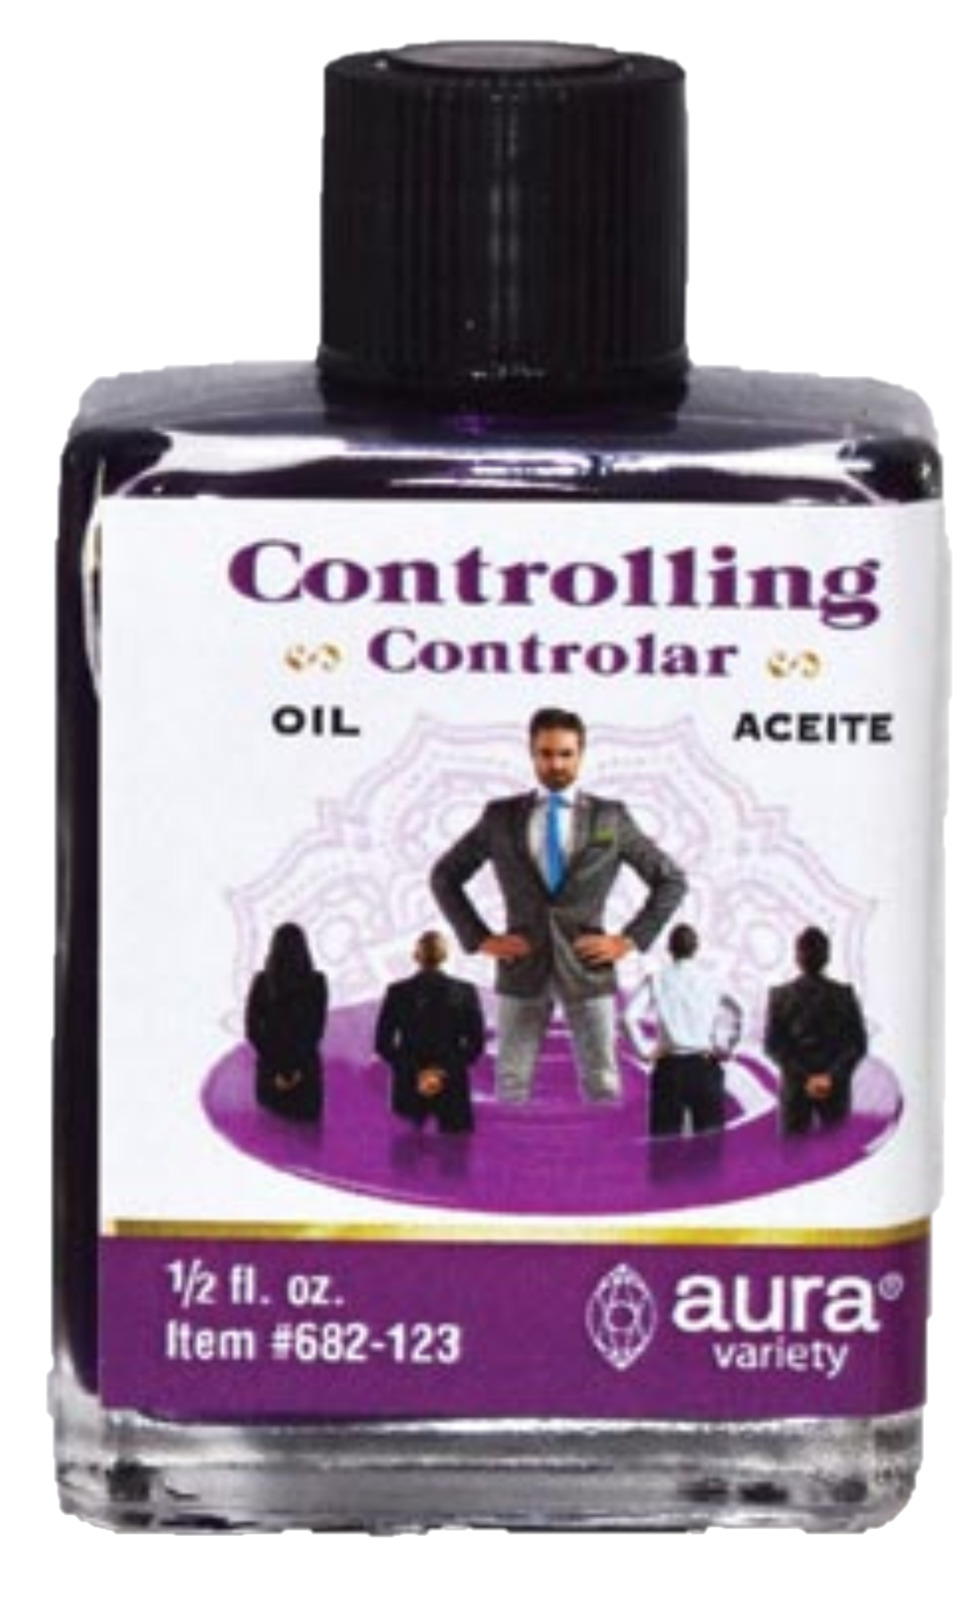 Controlling Oil